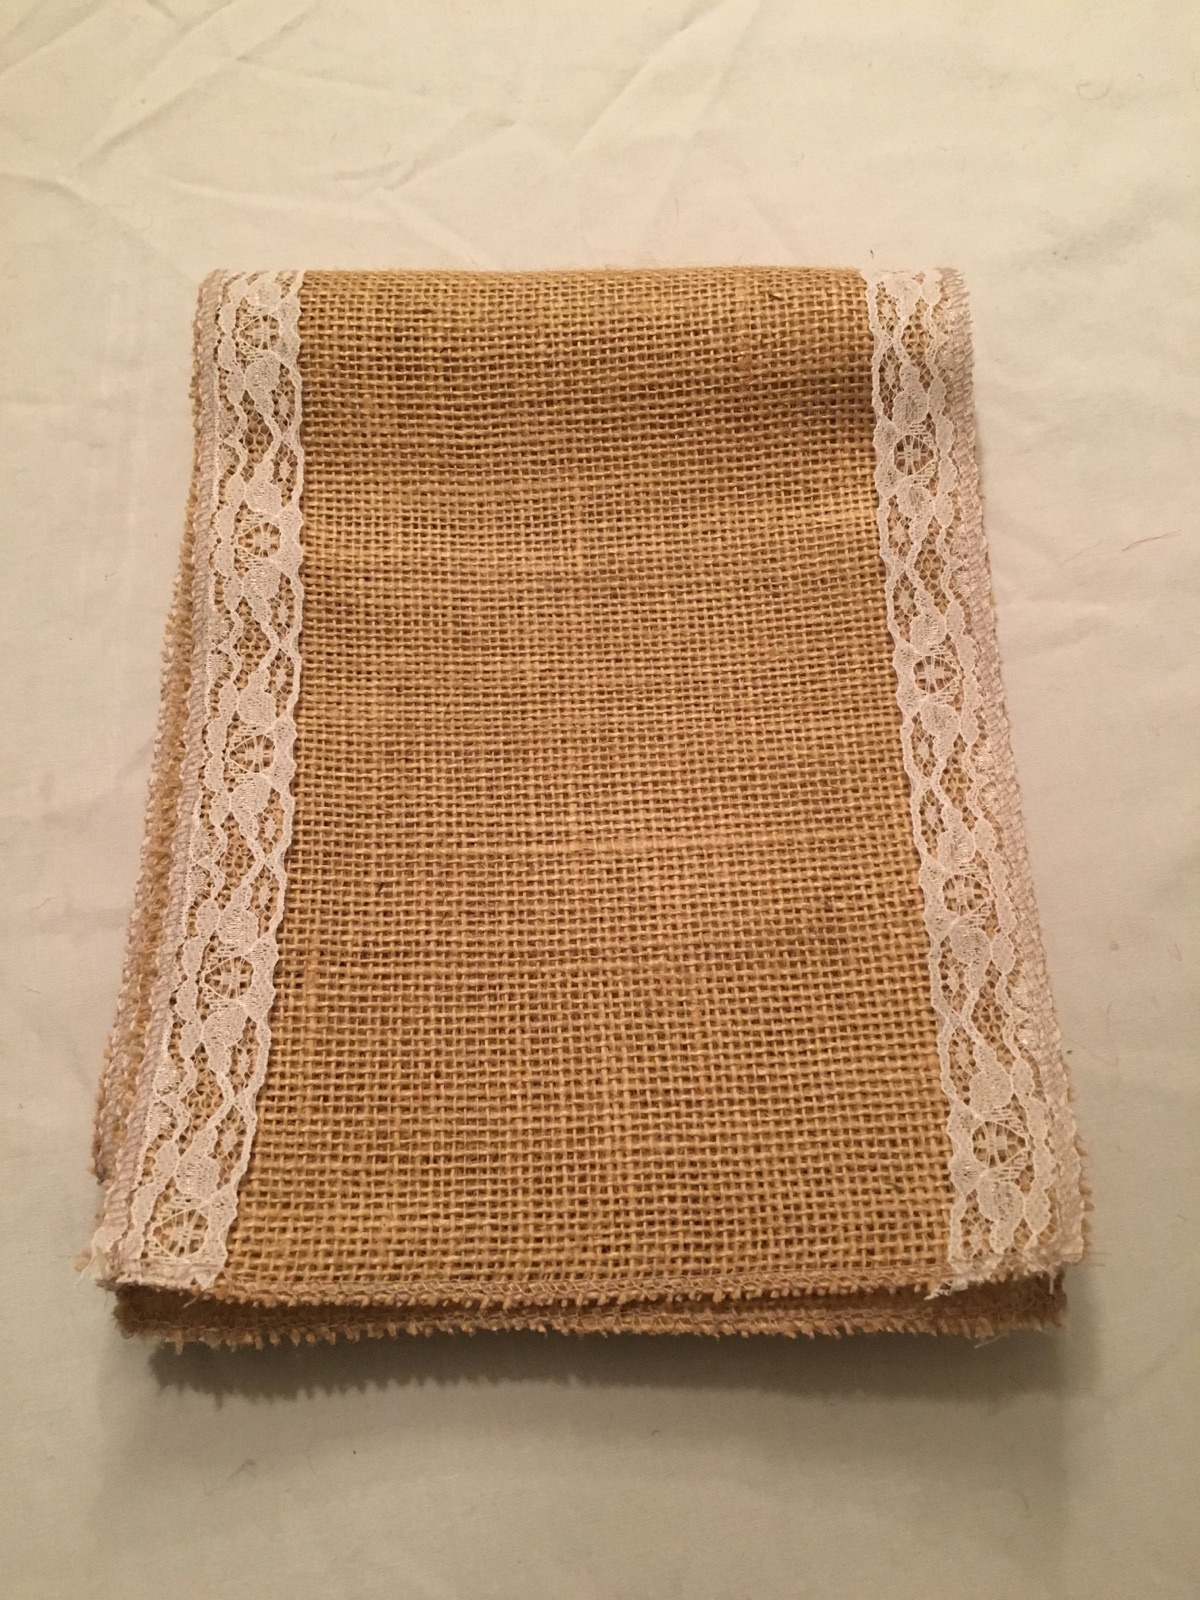 7" Natural Burlap Ribbon With White Floral Lace - 6 foot length